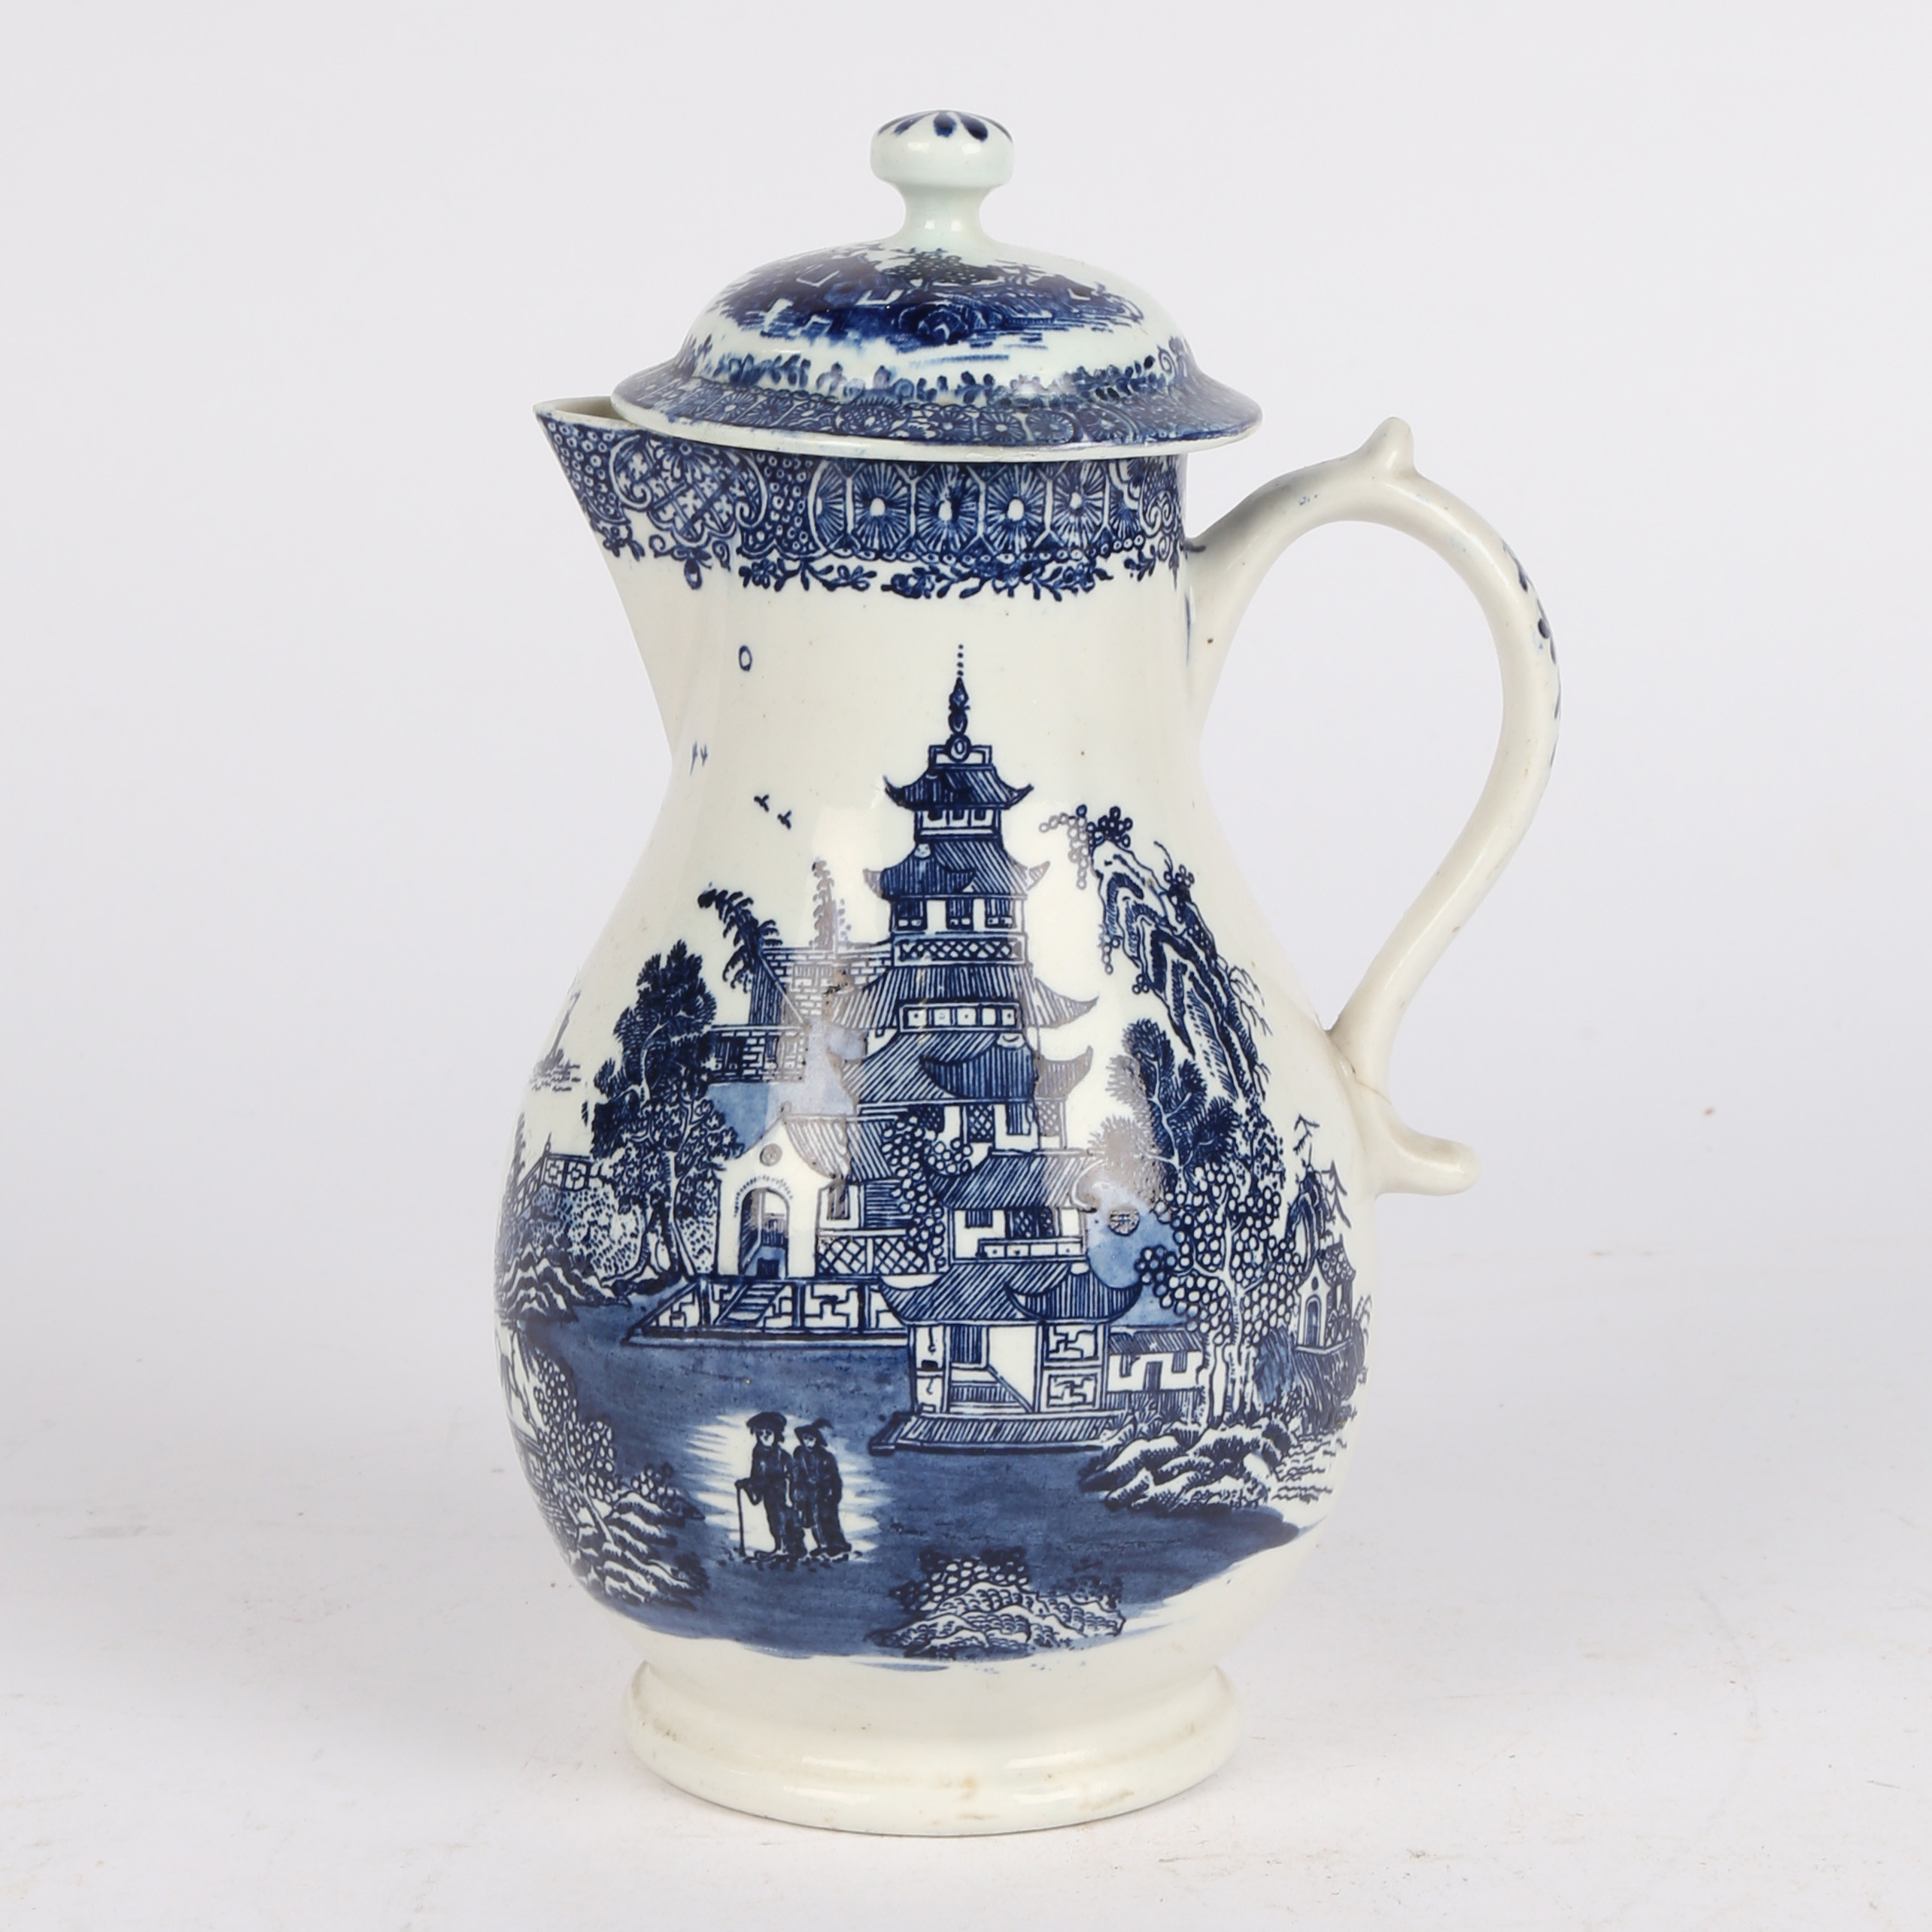 A LOWESTOFT PORCELAIN HOT WATER JUG AND COVER.